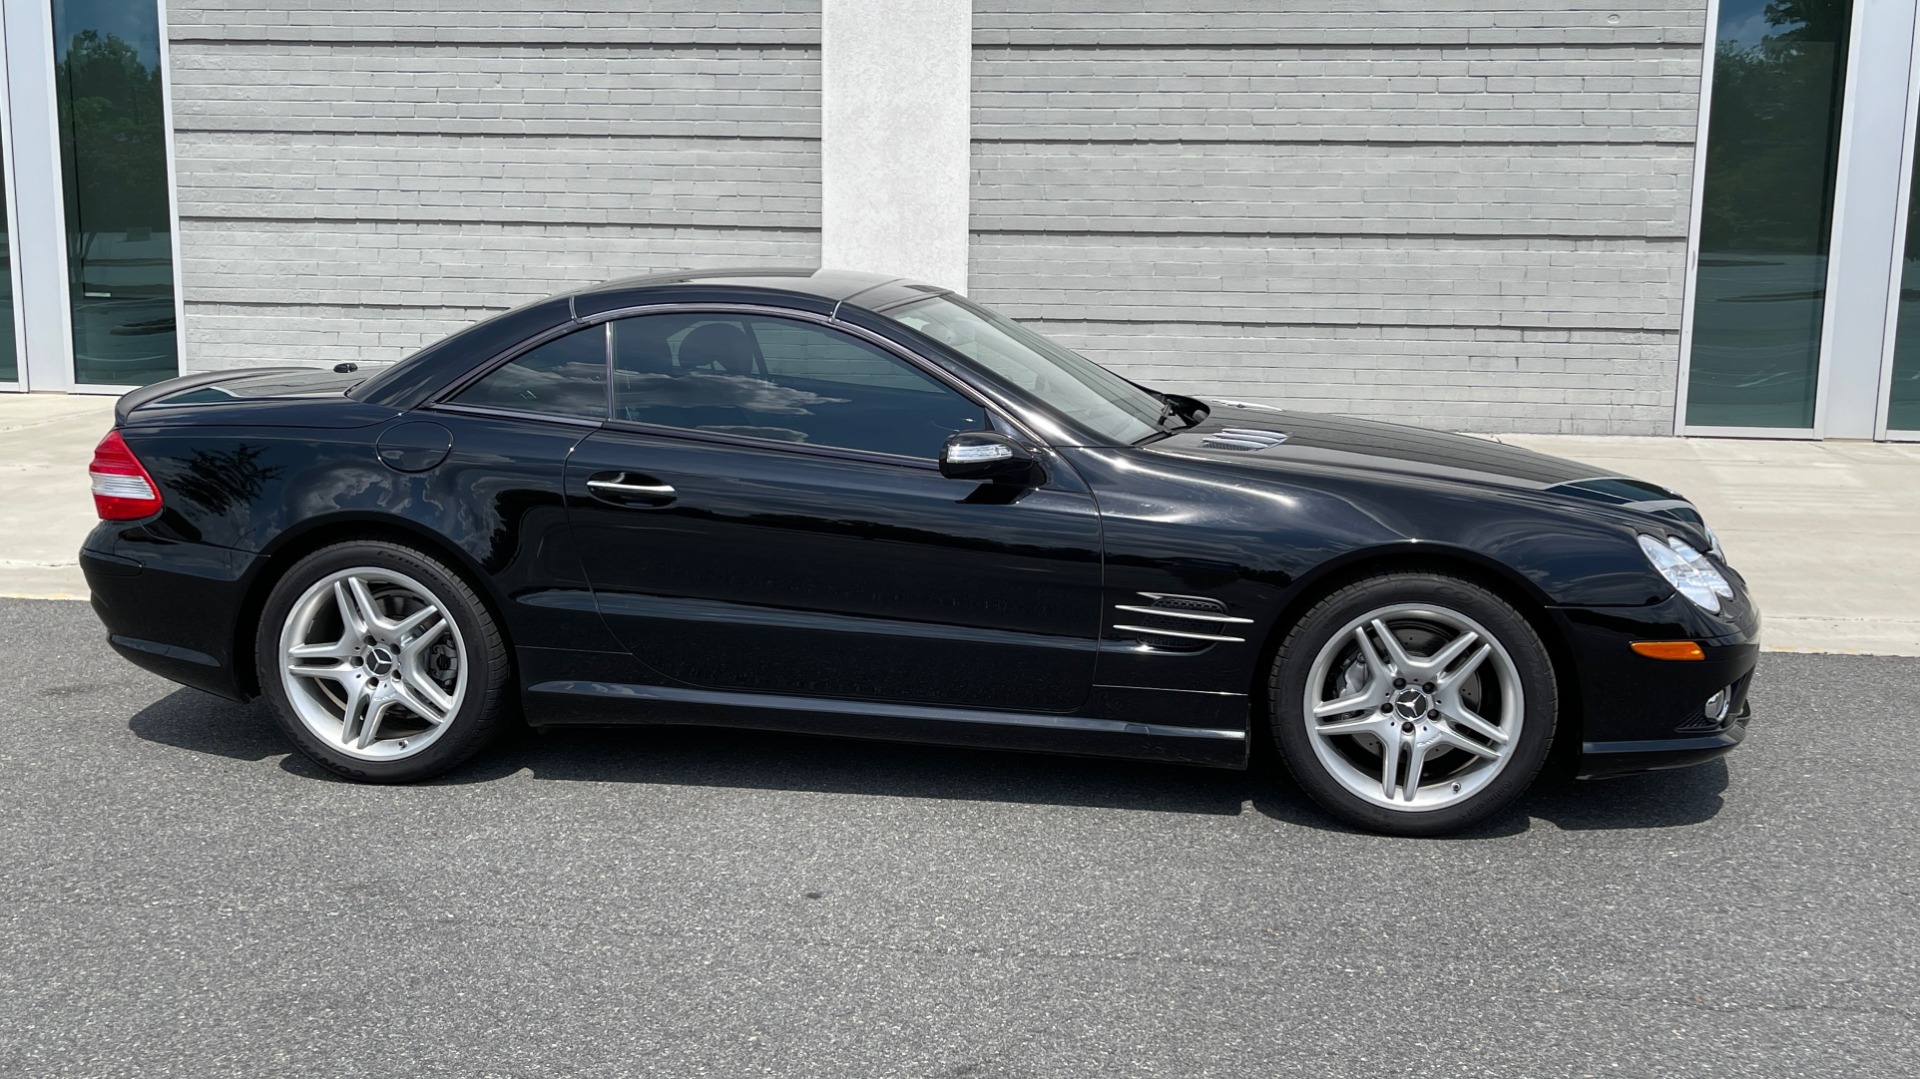 Used 2007 Mercedes-Benz SL-Class 5.5L V8 for sale Sold at Formula Imports in Charlotte NC 28227 8